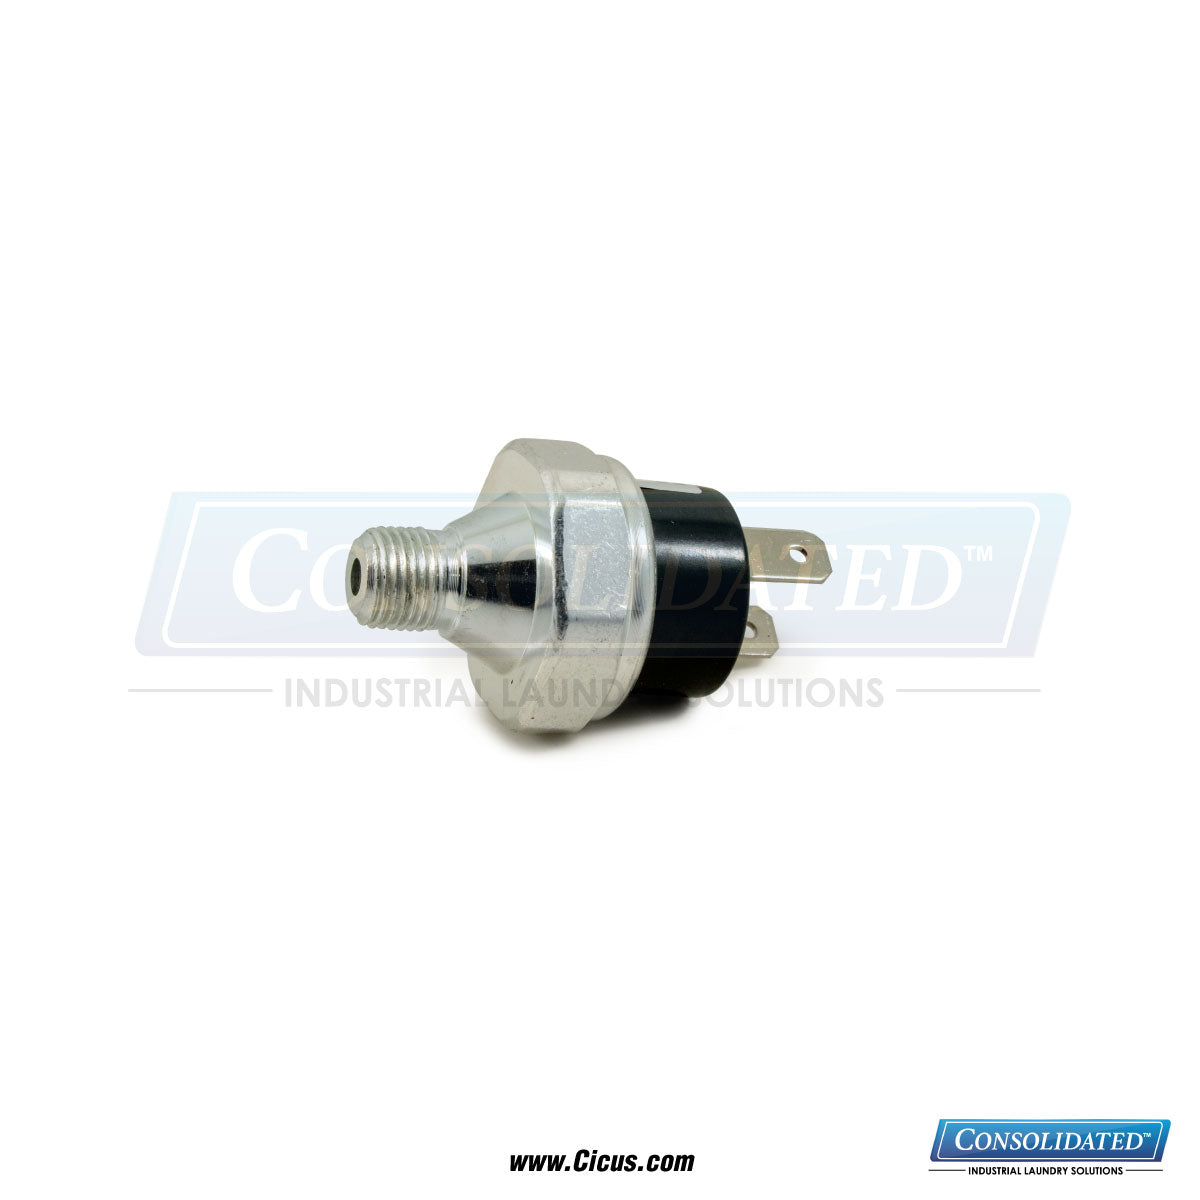 American Dryer Company  Water Jet Pressure Switch [136987] - Front View